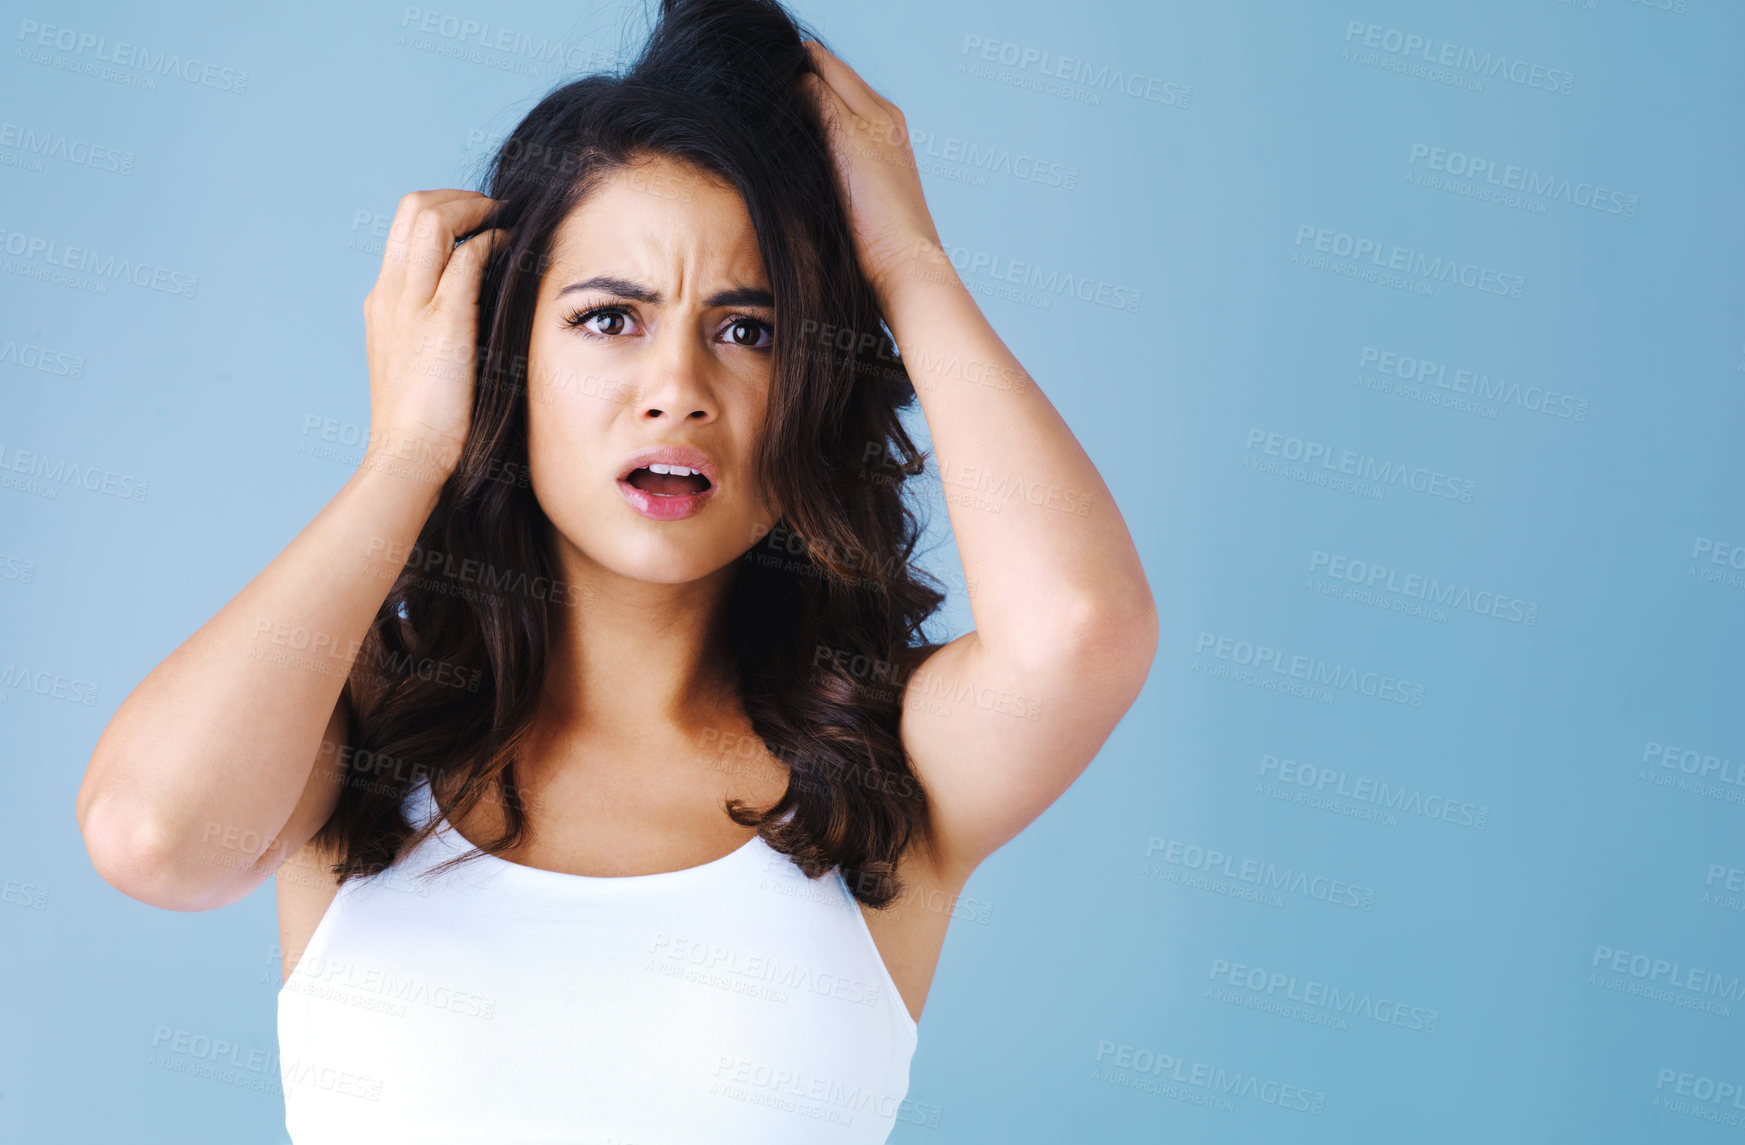 Buy stock photo Studio shot of an attractive young woman looking worried against a blue background